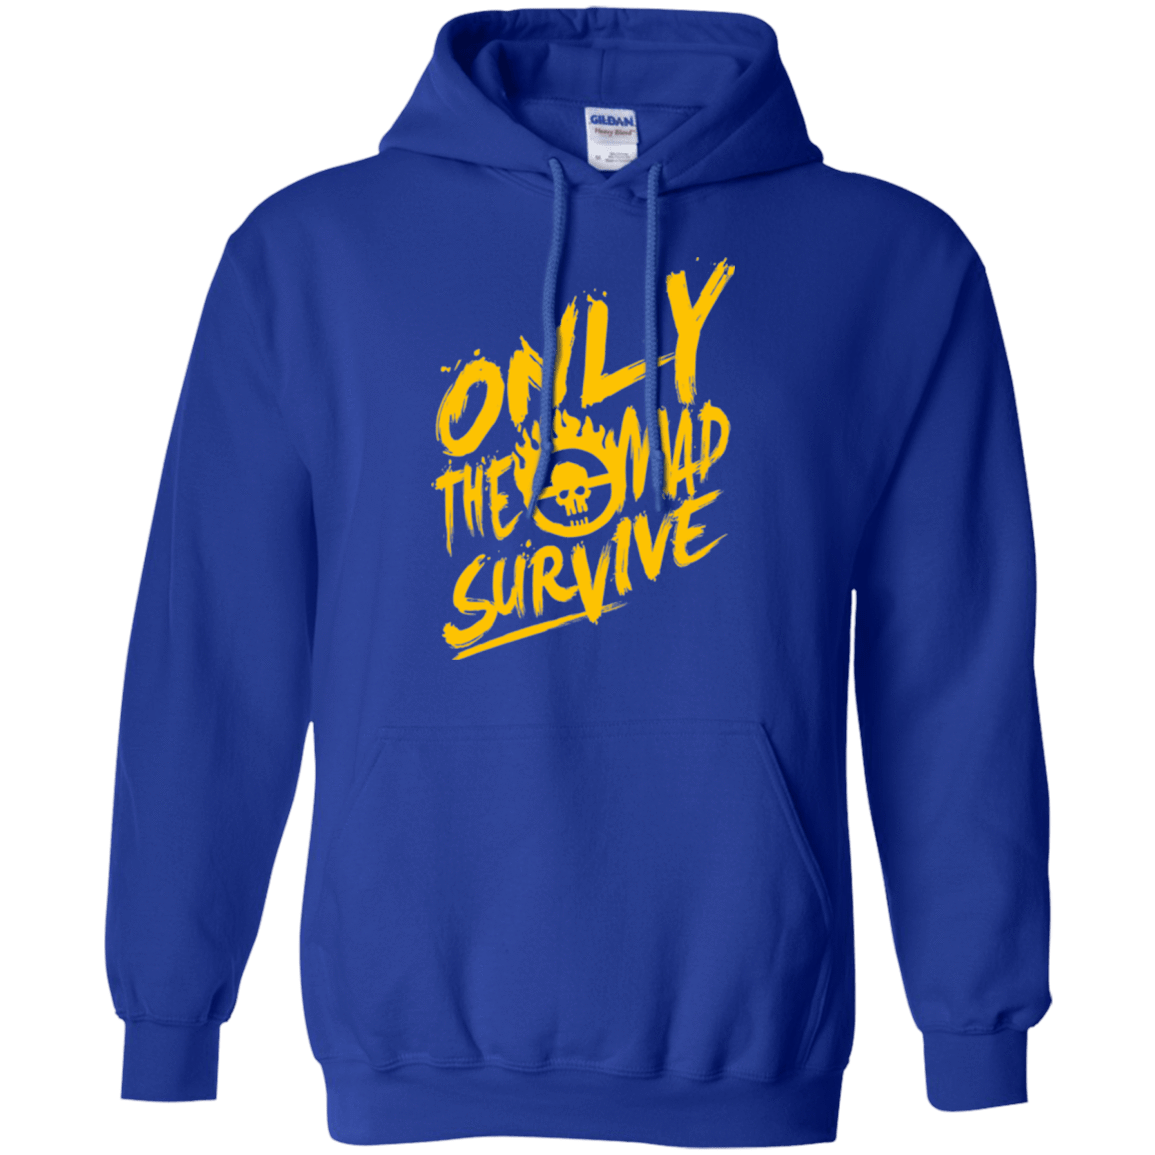 Sweatshirts Royal / Small Only The Mad Yellow Pullover Hoodie